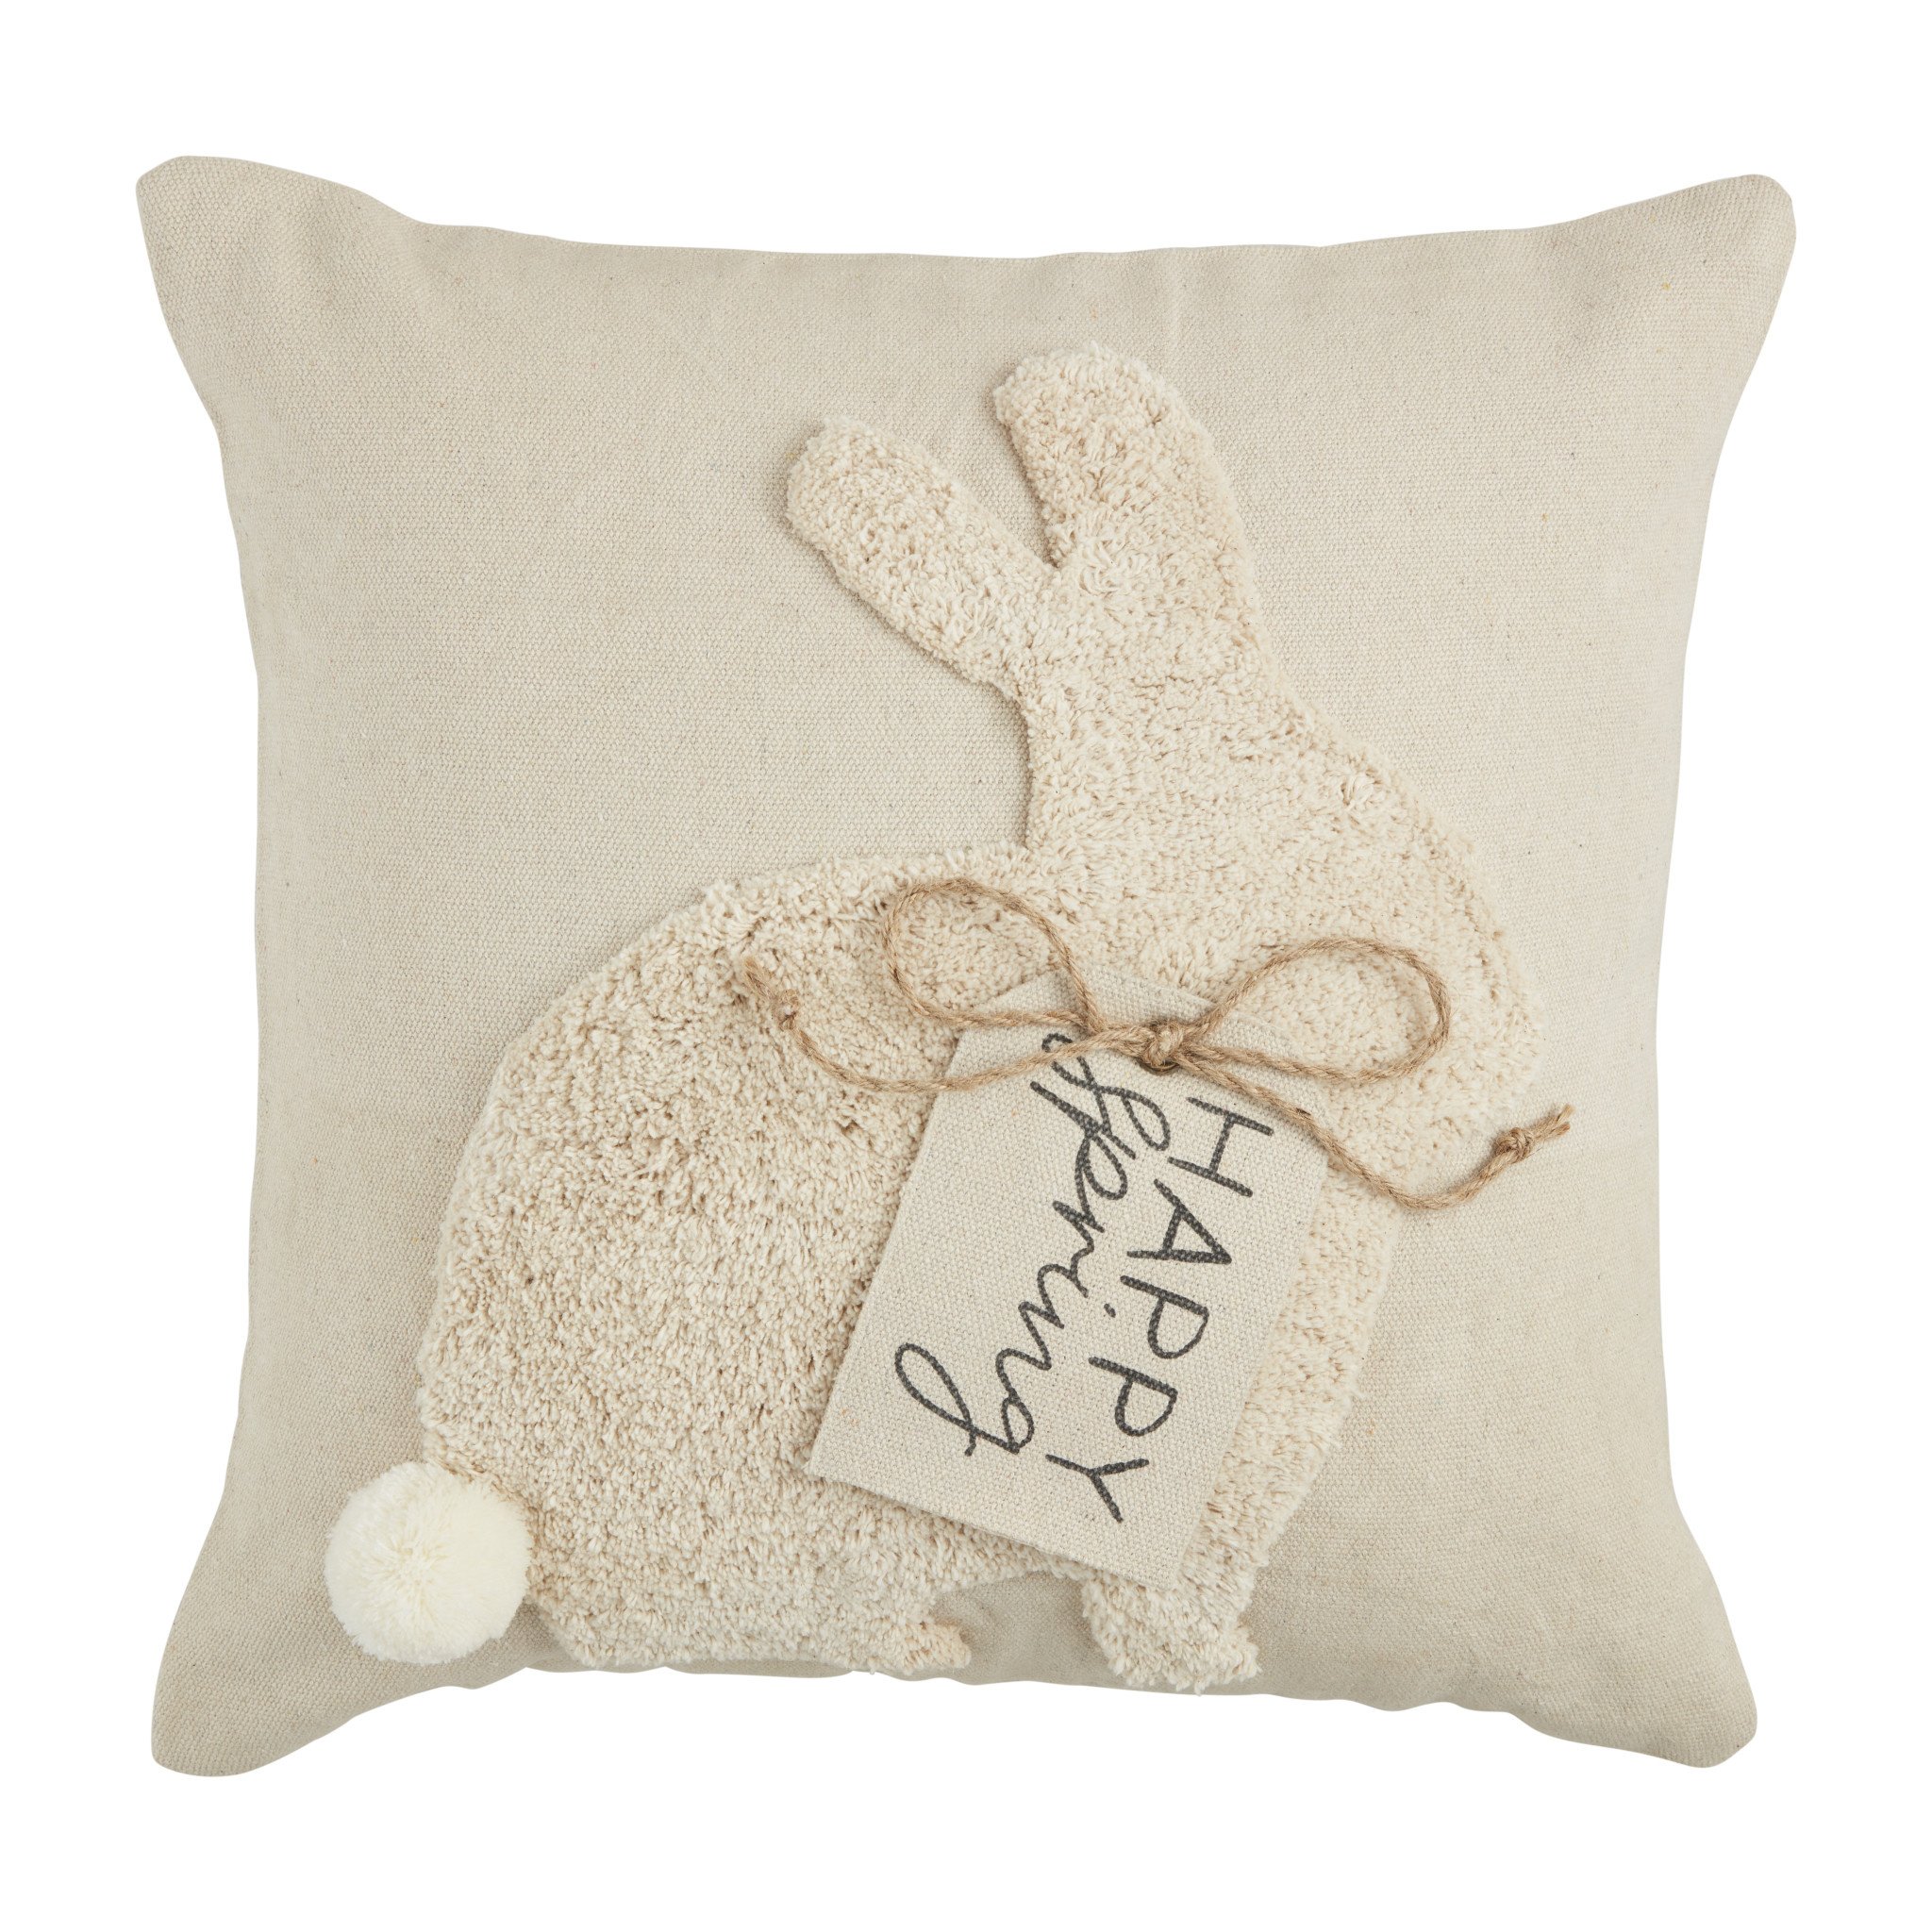 Mudpie SQUARE TUFTING BUNNY PILLOW